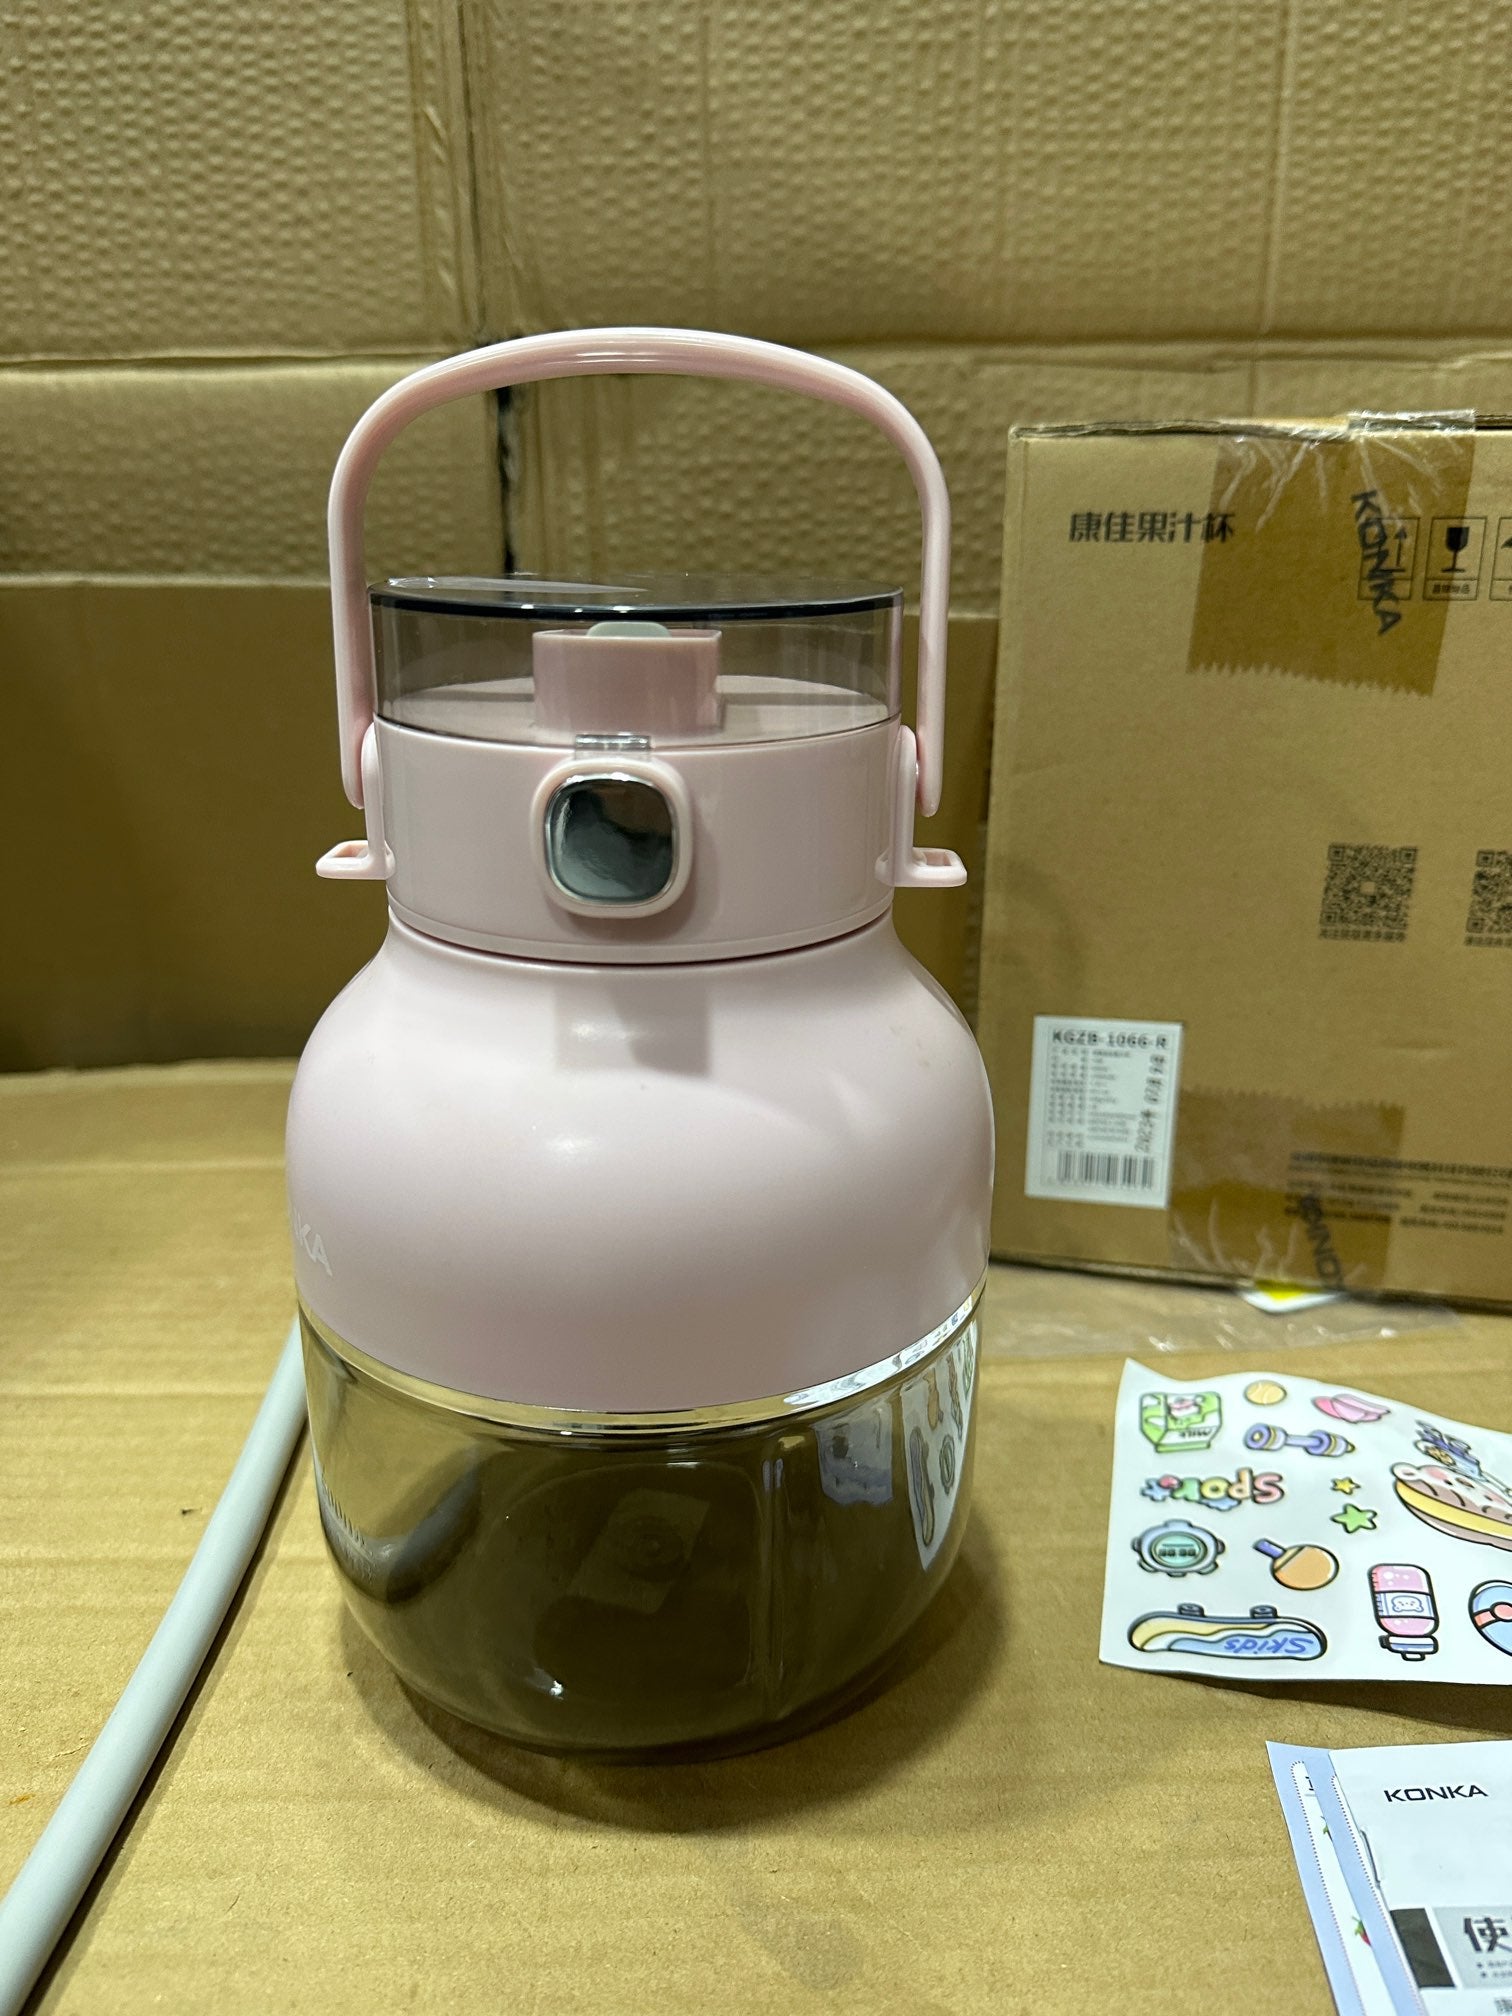 Lot imported Konka Rechargeable Juicer 500ml